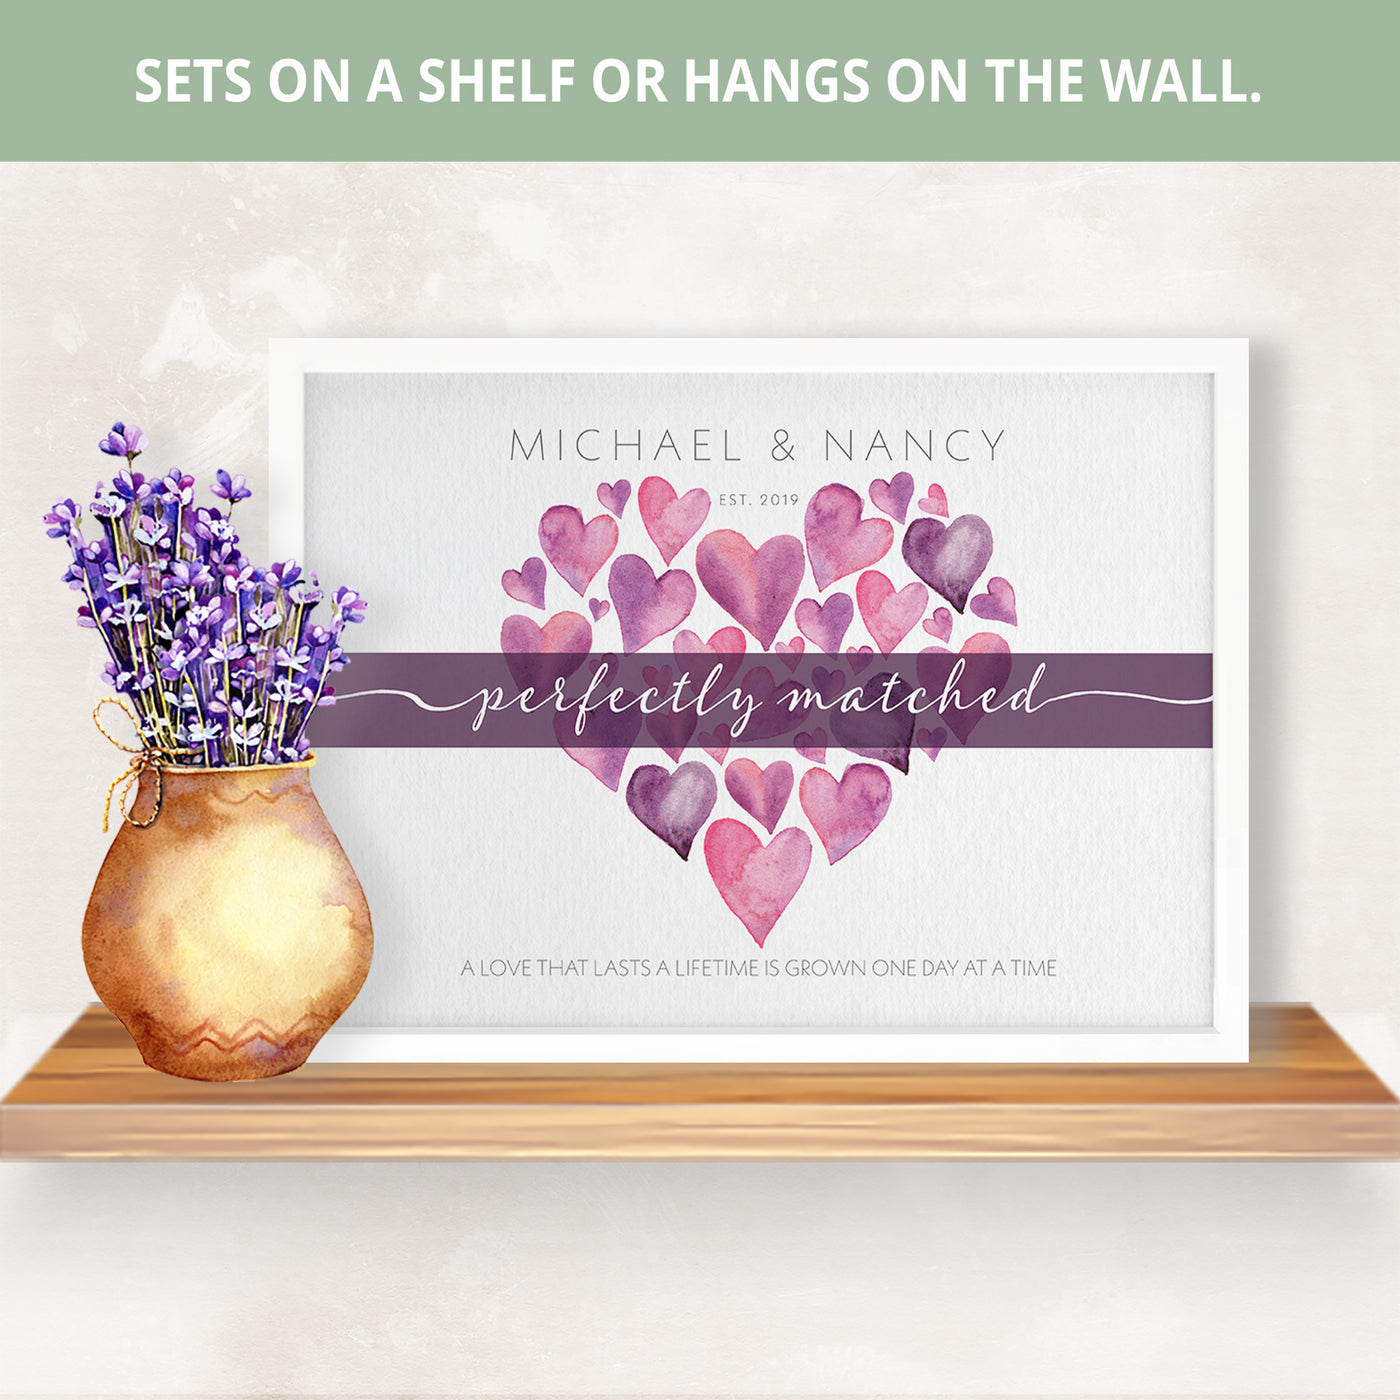 Perfectly Matched Hearts | Personalized Marriage, Anniversary Gift, Print, Wall Decor